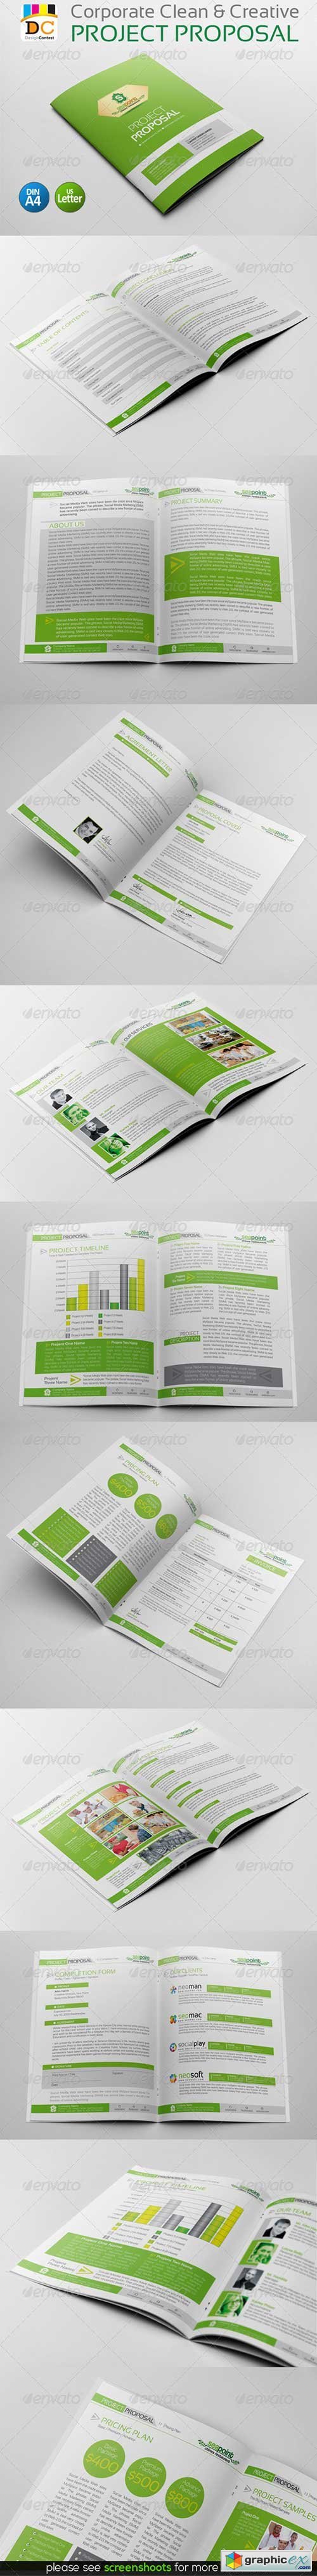 Corporate Creative Clean Project Proposal